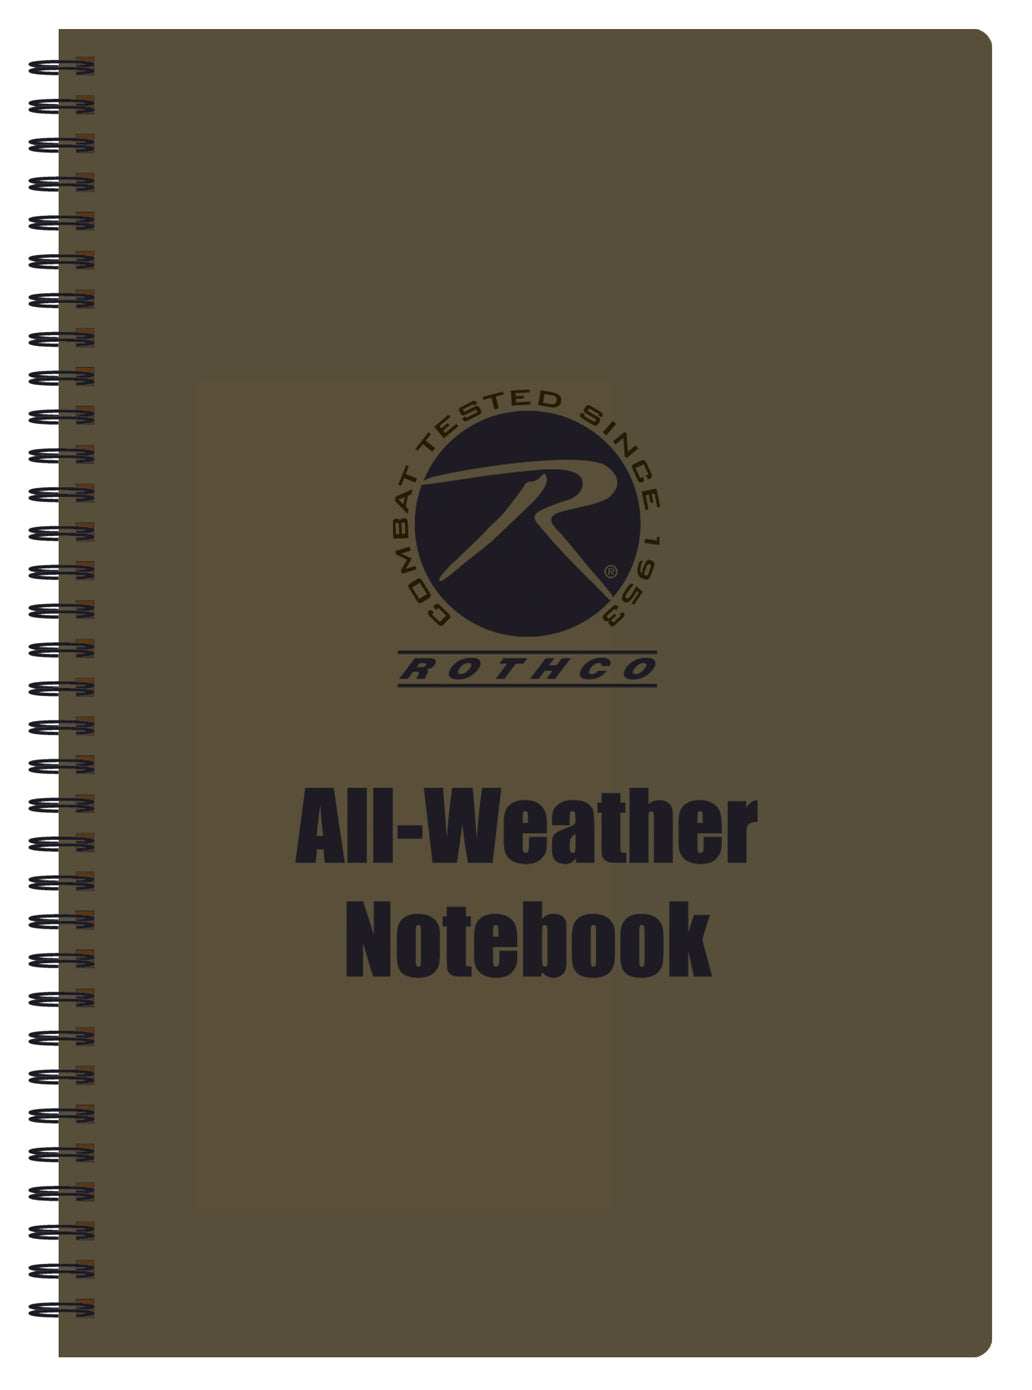 Milspec All-Weather Waterproof Notebook Bug Out Bag Collection MilTac Tactical Military Outdoor Gear Australia